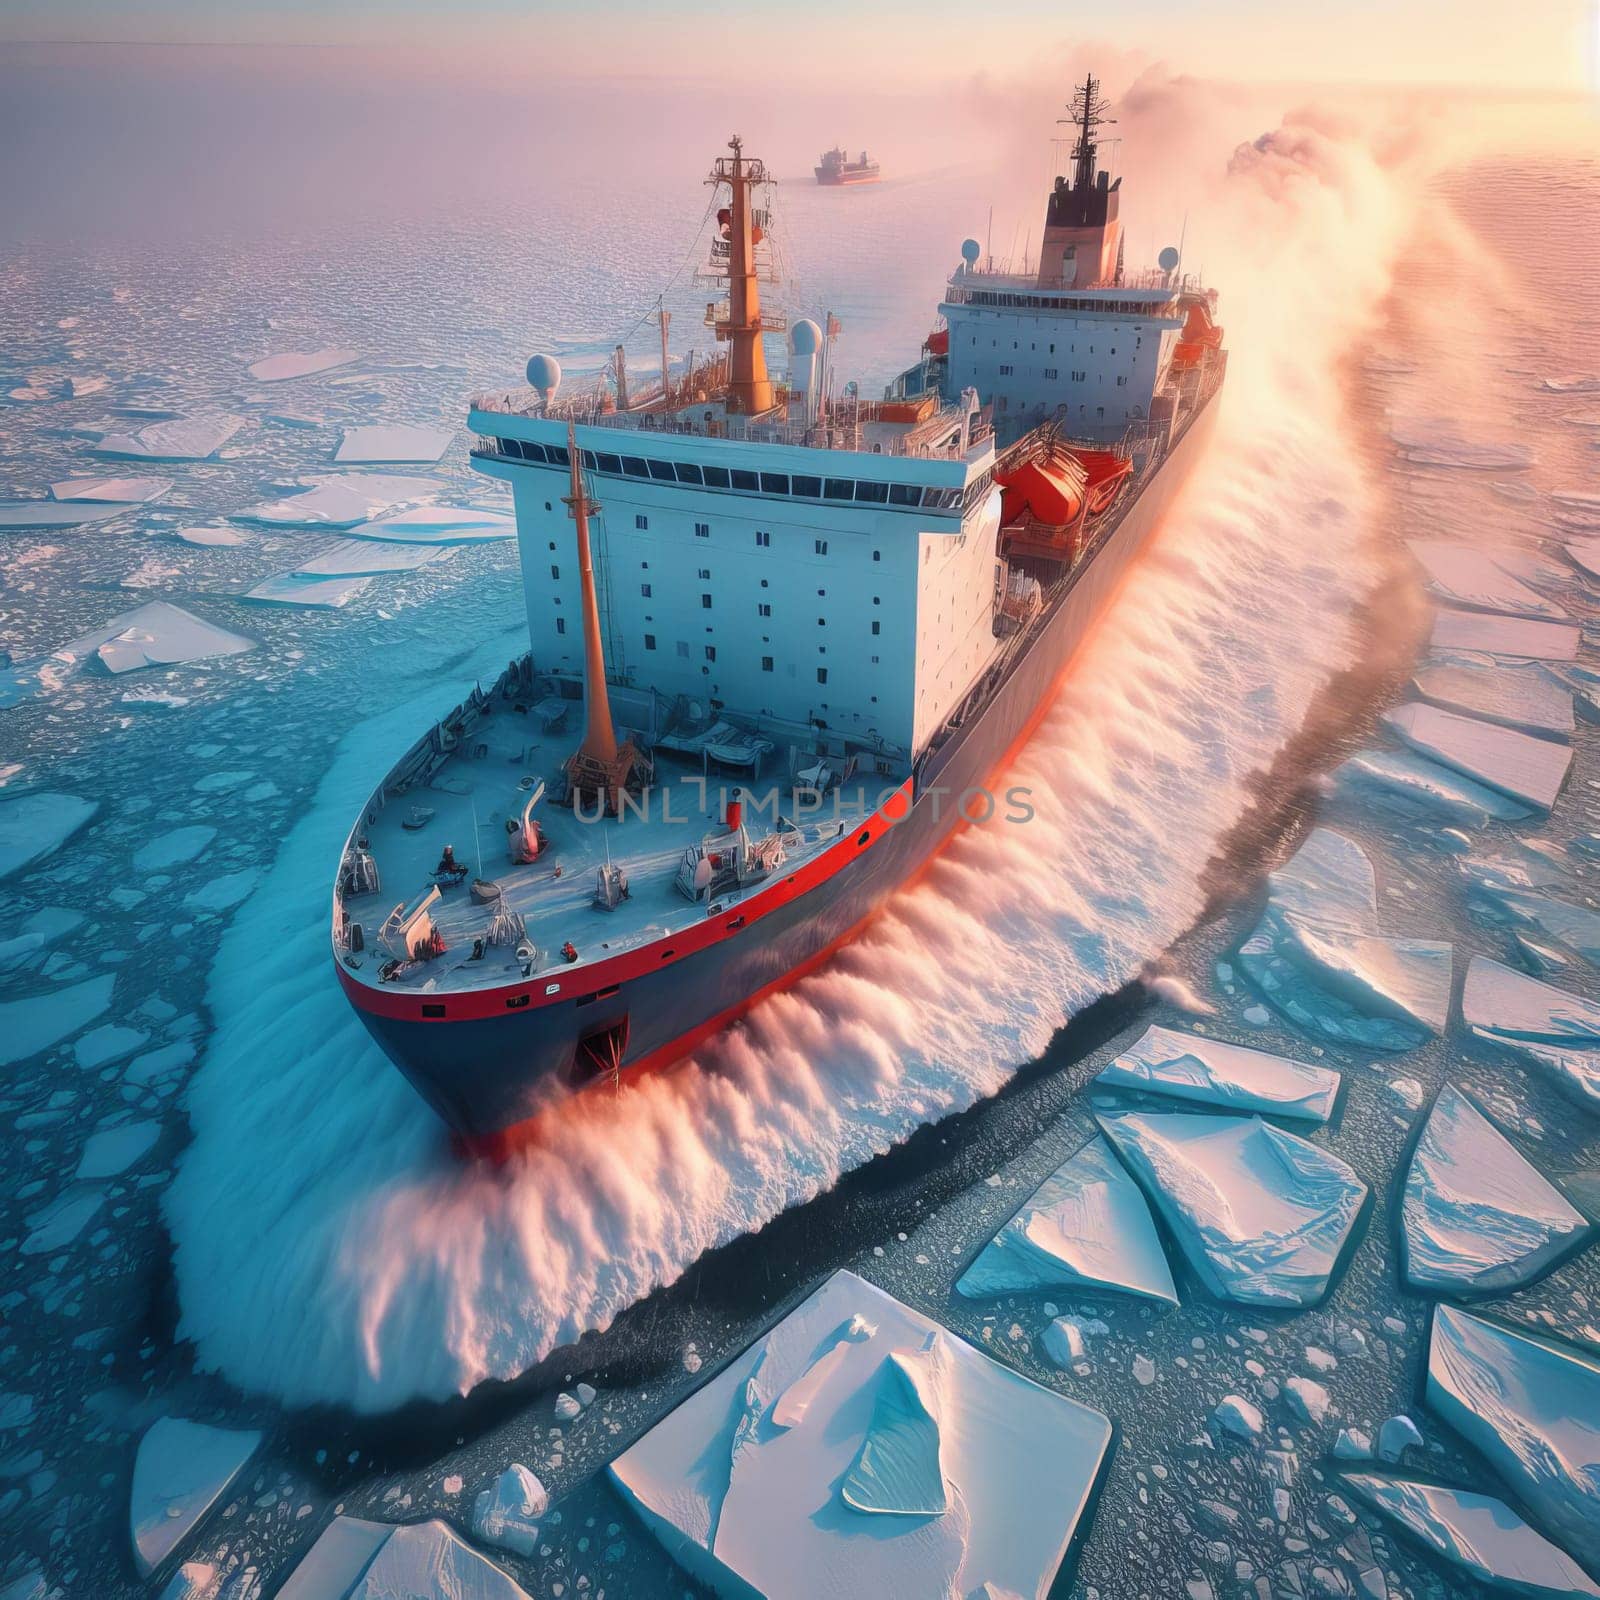 Icebreaker ship cutting through icy waters, with another vessel following, under a soft glow of sunset. by sfinks